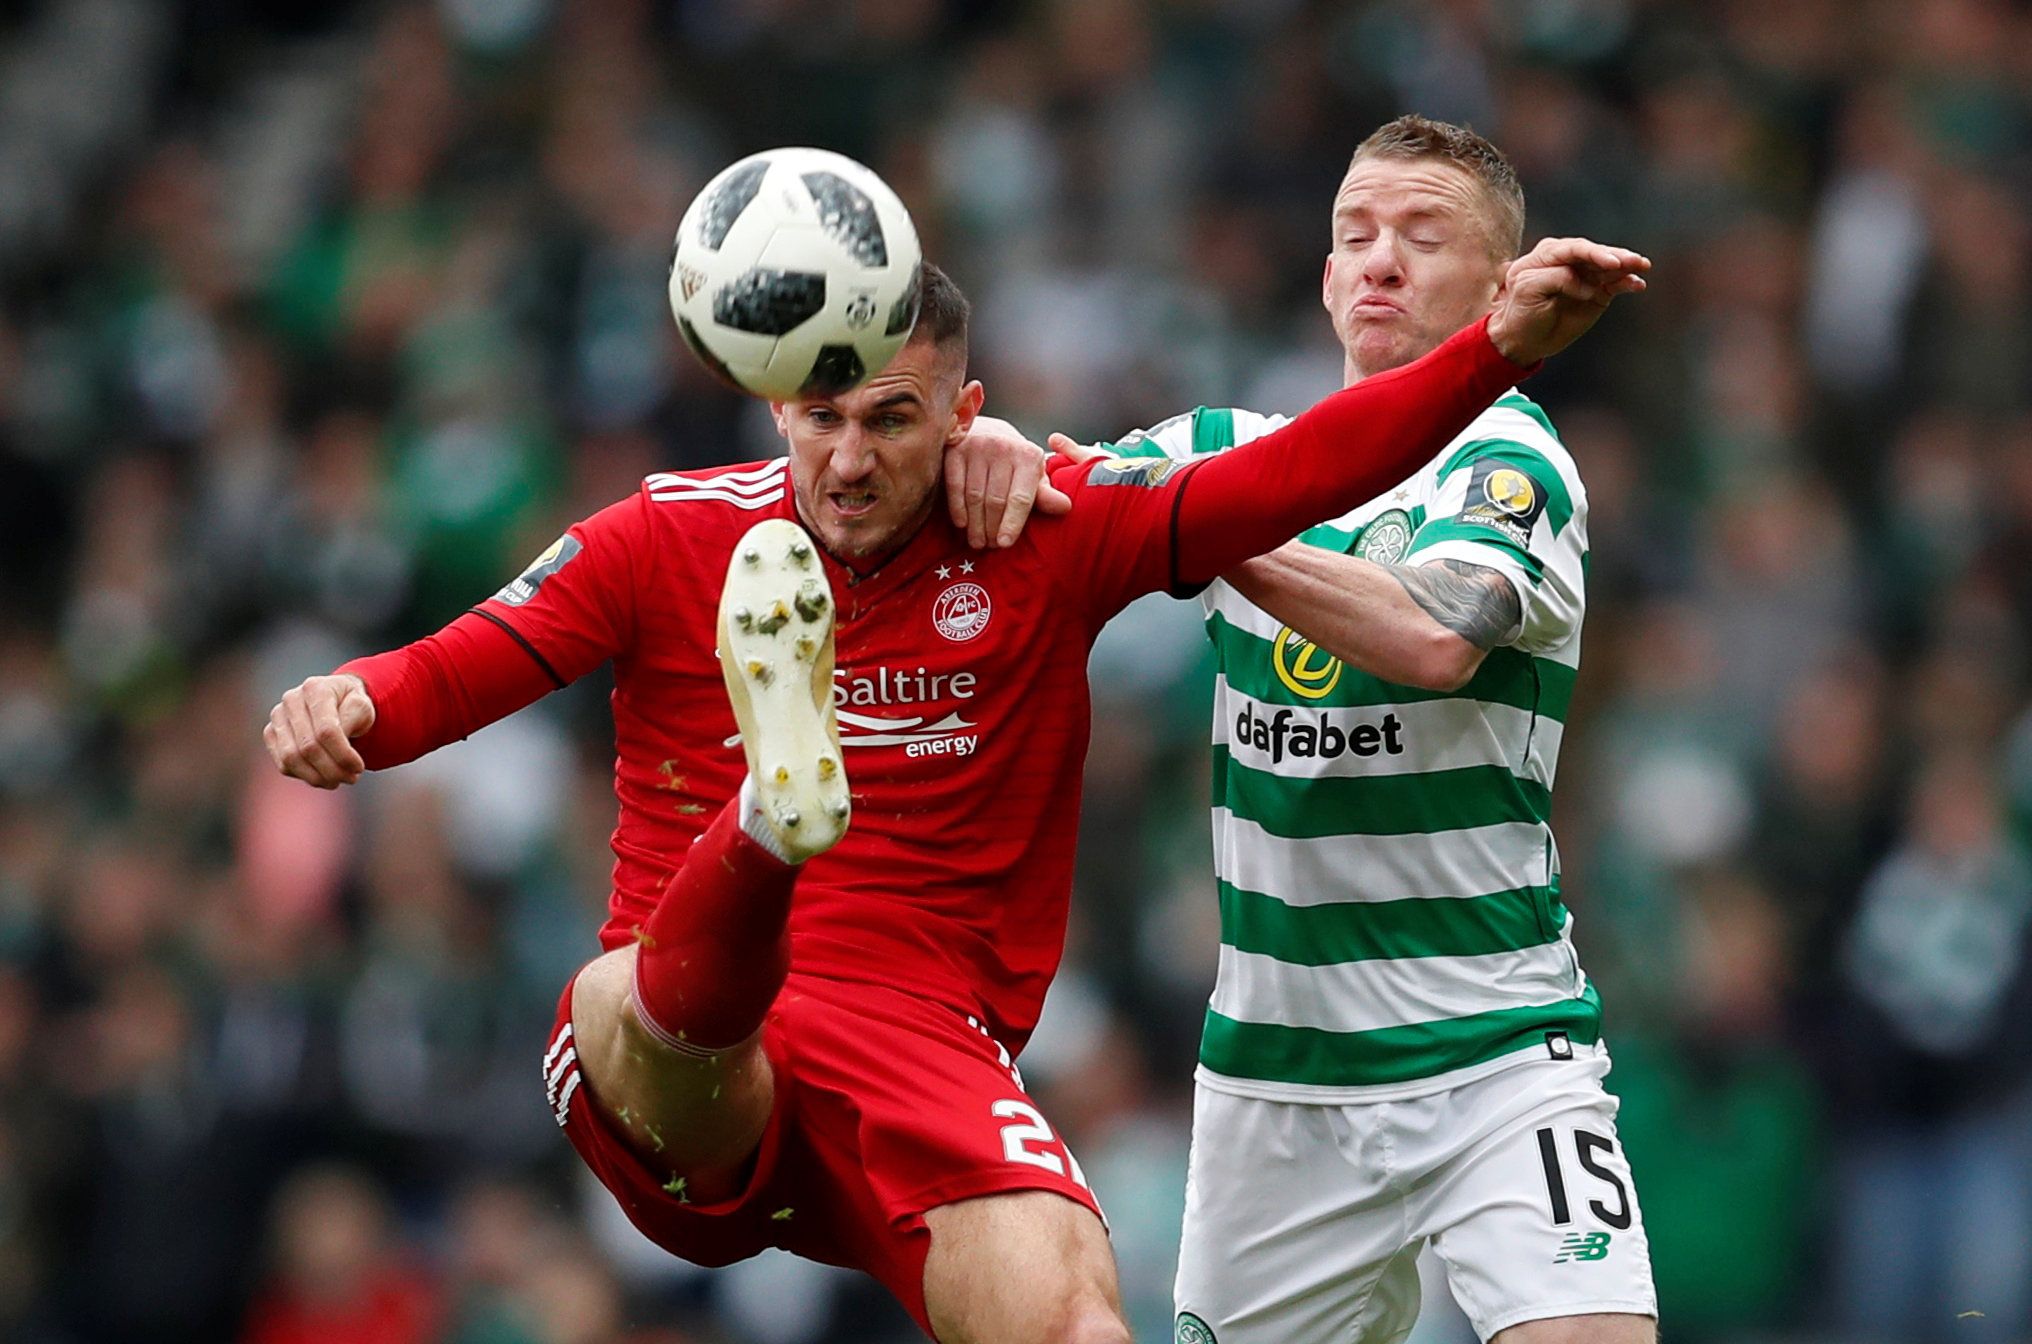 Soccer Football - Scottish FA Cup Semi Final - Aberdeen v Celtic - Hampden Park, Glasgow, Britain - April 14, 2019  Aberdeen's Dominic Ball in action with Celtic's Jonny Hayes      REUTERS/Russell Cheyne